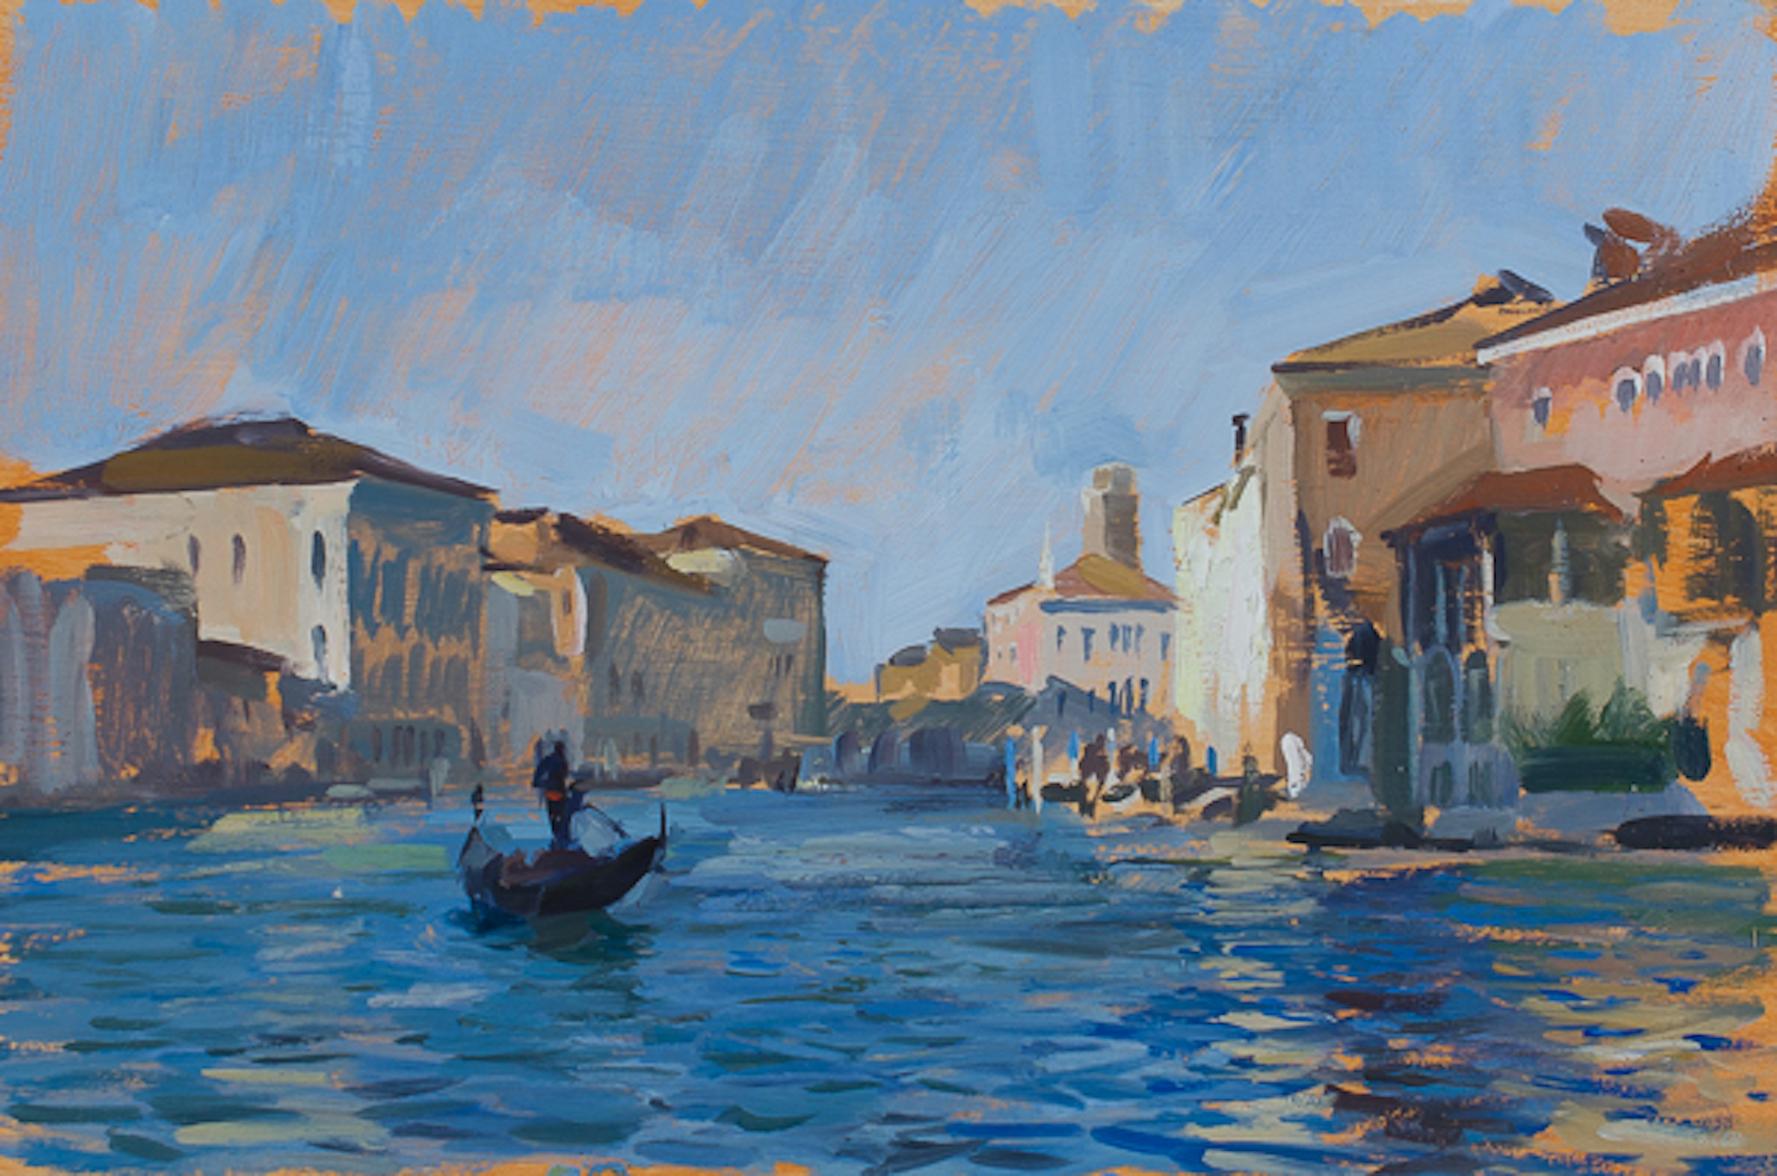 Landscape Painting Marc Dalessio - Le Grand Canal